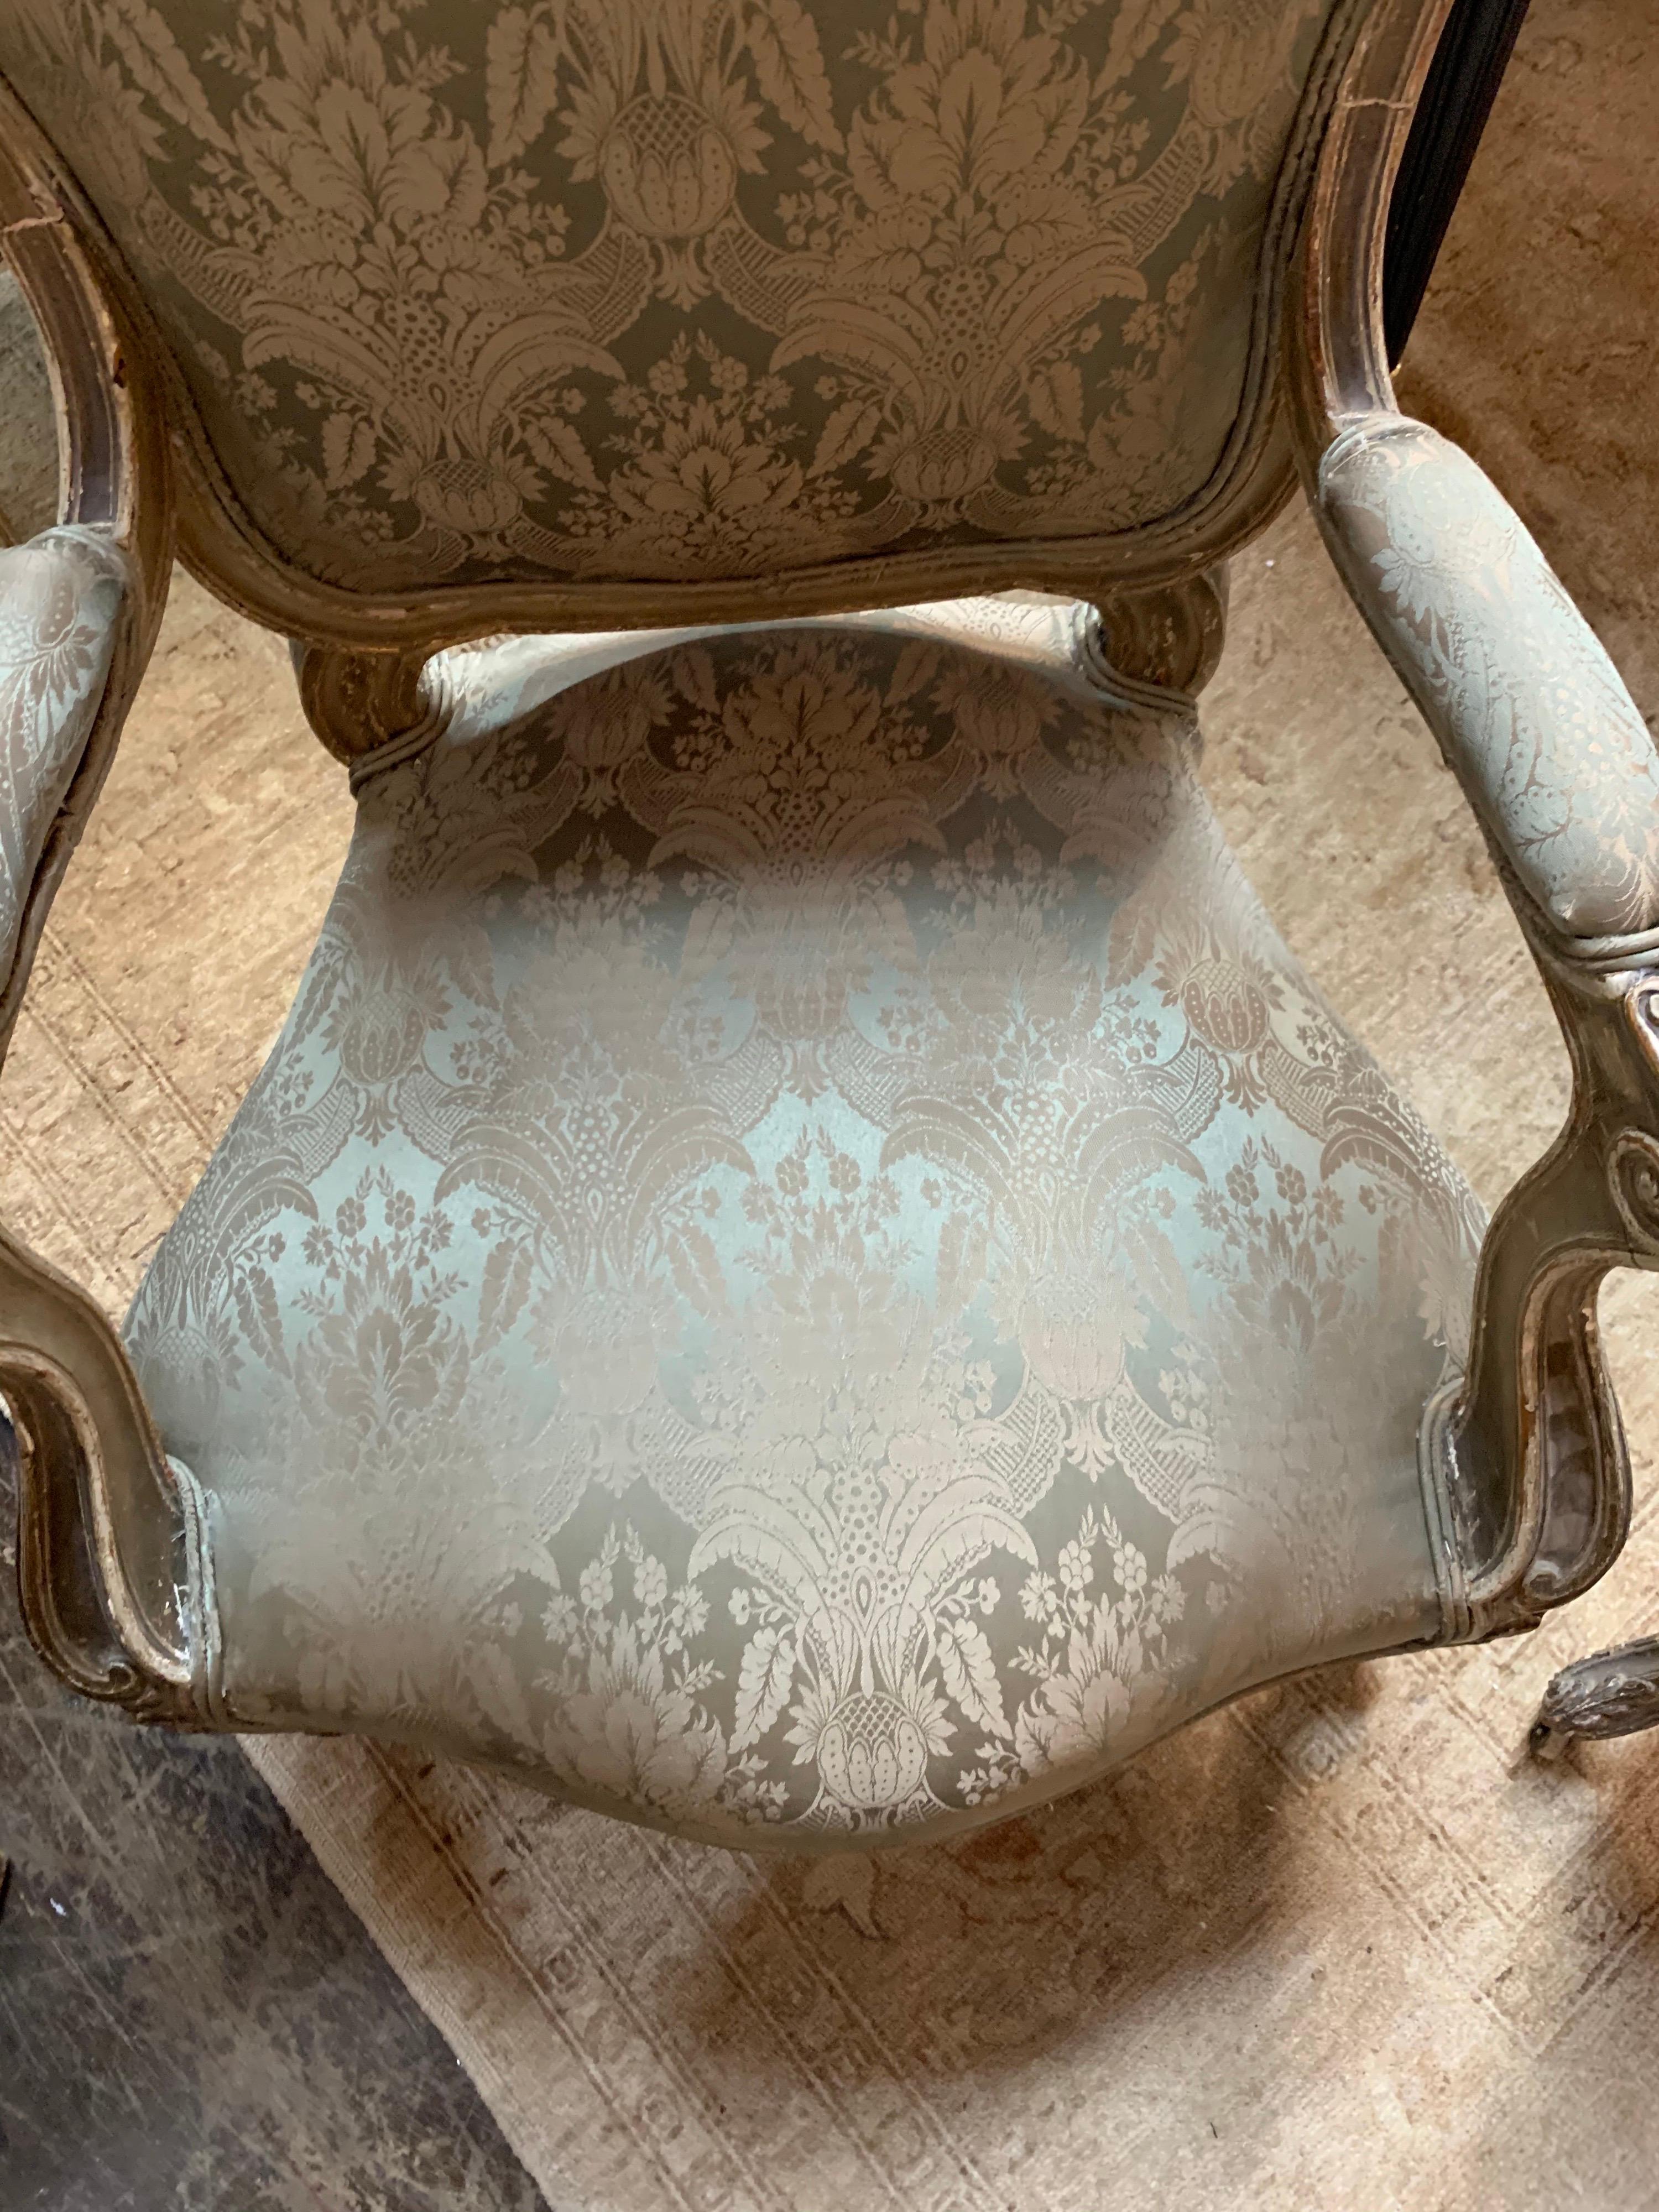 Exquisite pair of 19th century carved and painted Italian armchairs. Very fine carvings along with beautiful sage green colored fabric. A great pair for a lovely home!